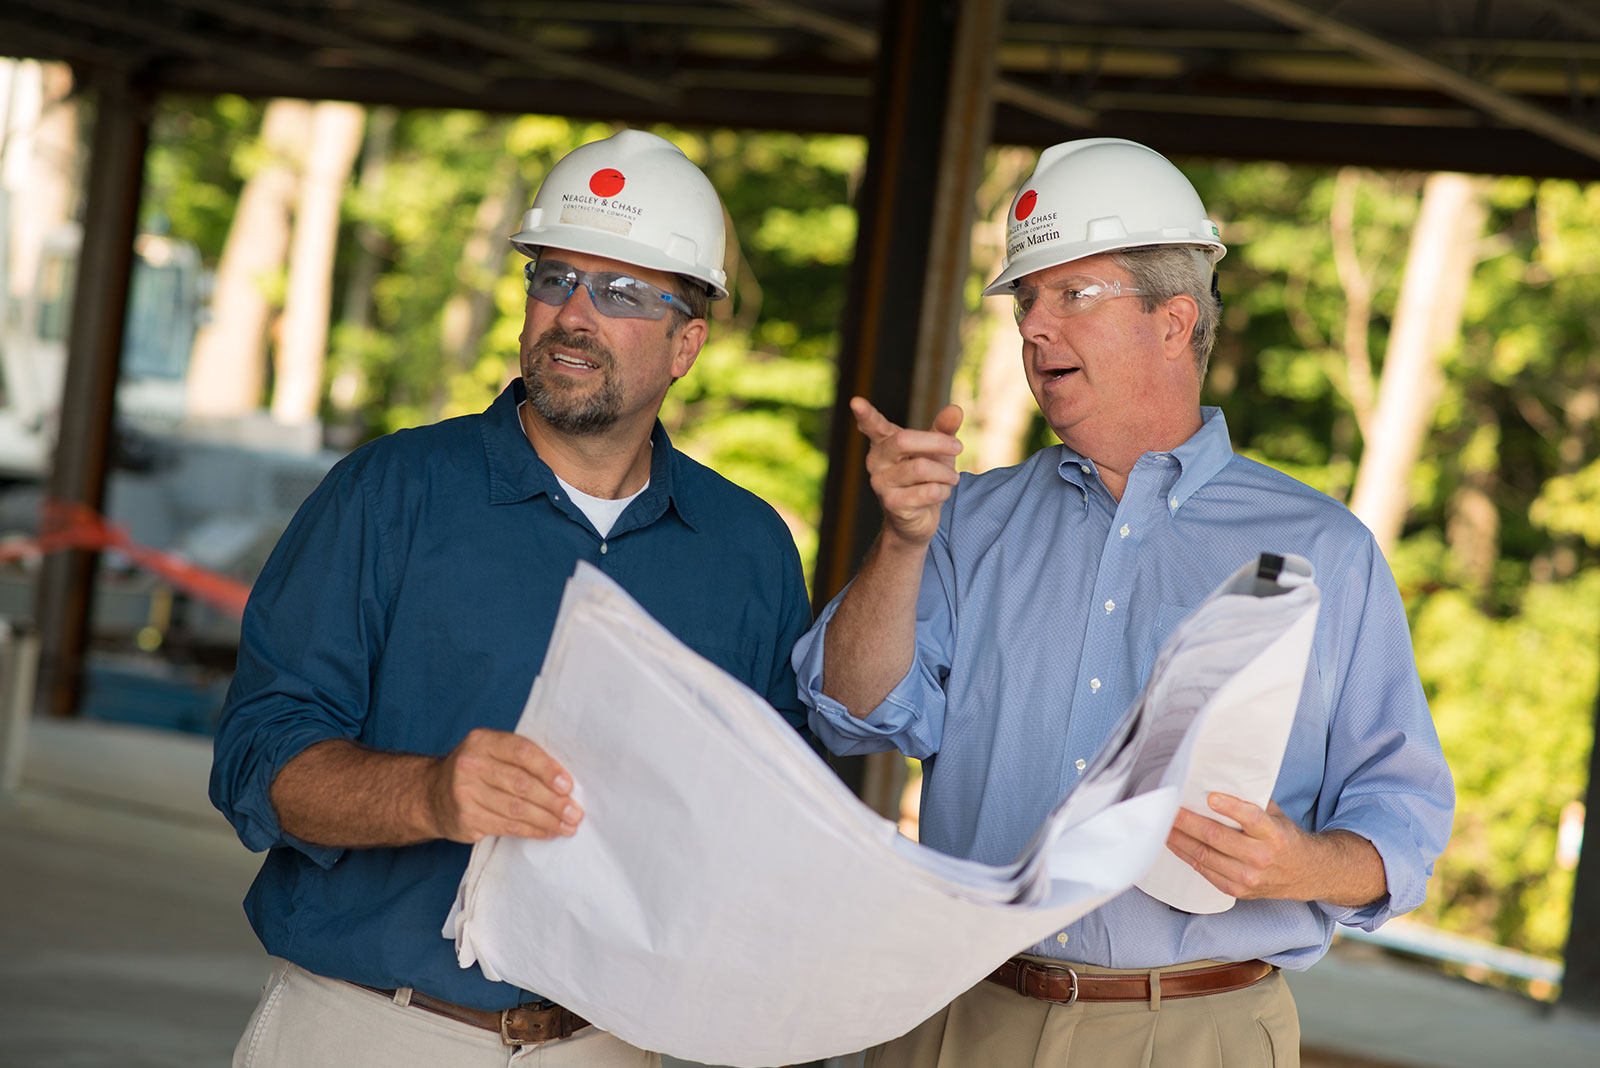 Two people in hardhats looking at blueprints